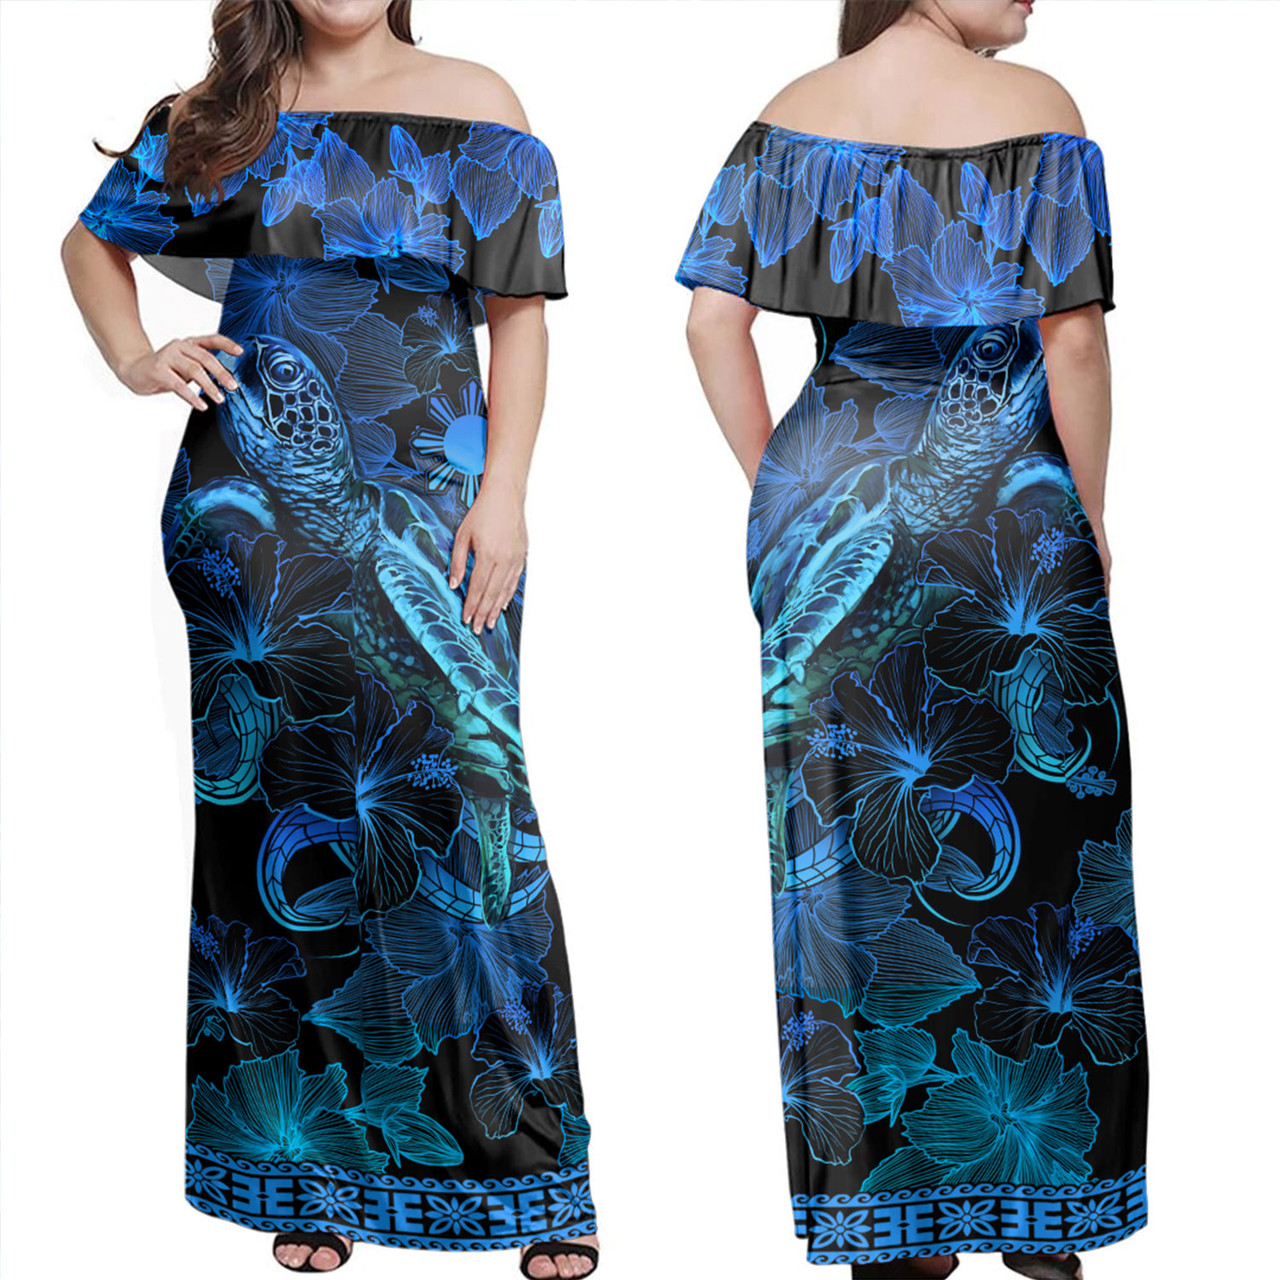 Philippines Filipinos Combo Off Shoulder Long Dress And Shirt Sea Turtle With Blooming Hibiscus Flowers Tribal Blue